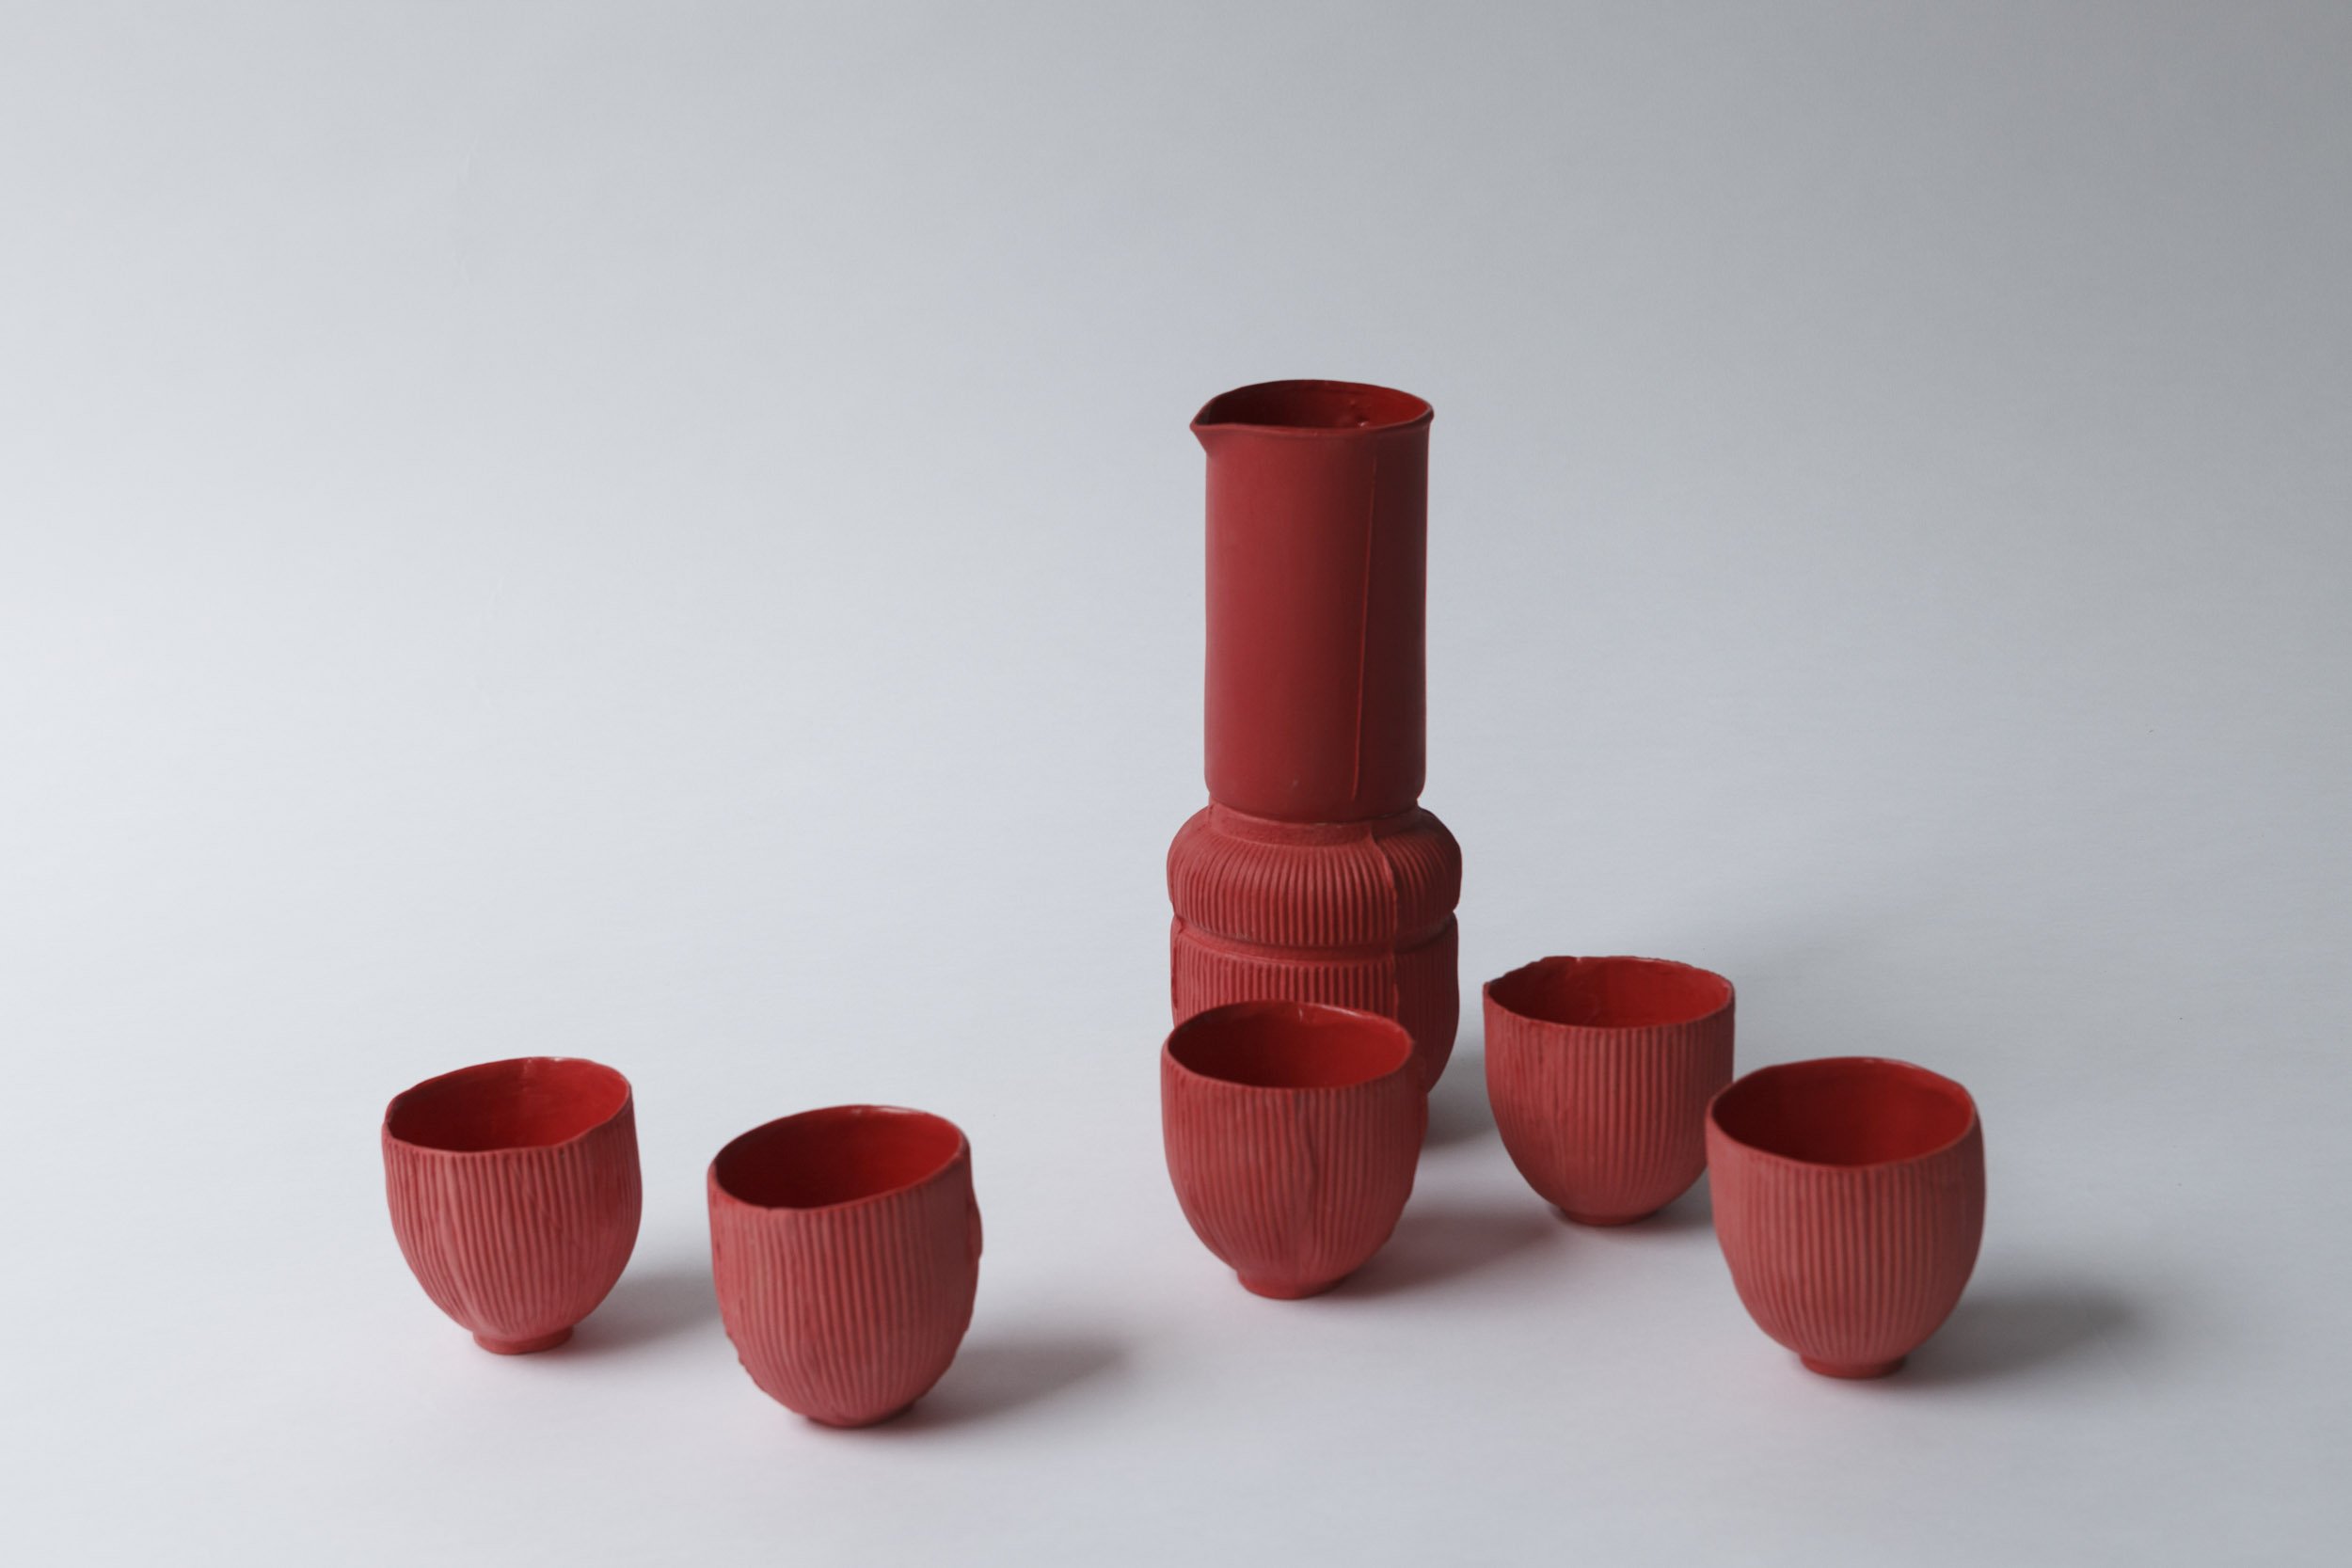  CERAMIC SERIES ITALIAN RED  Red porcelain manufactured by ceramic artist  Sarah Pschorn   Many thanks to Sarah for this wonderful collaboration! 